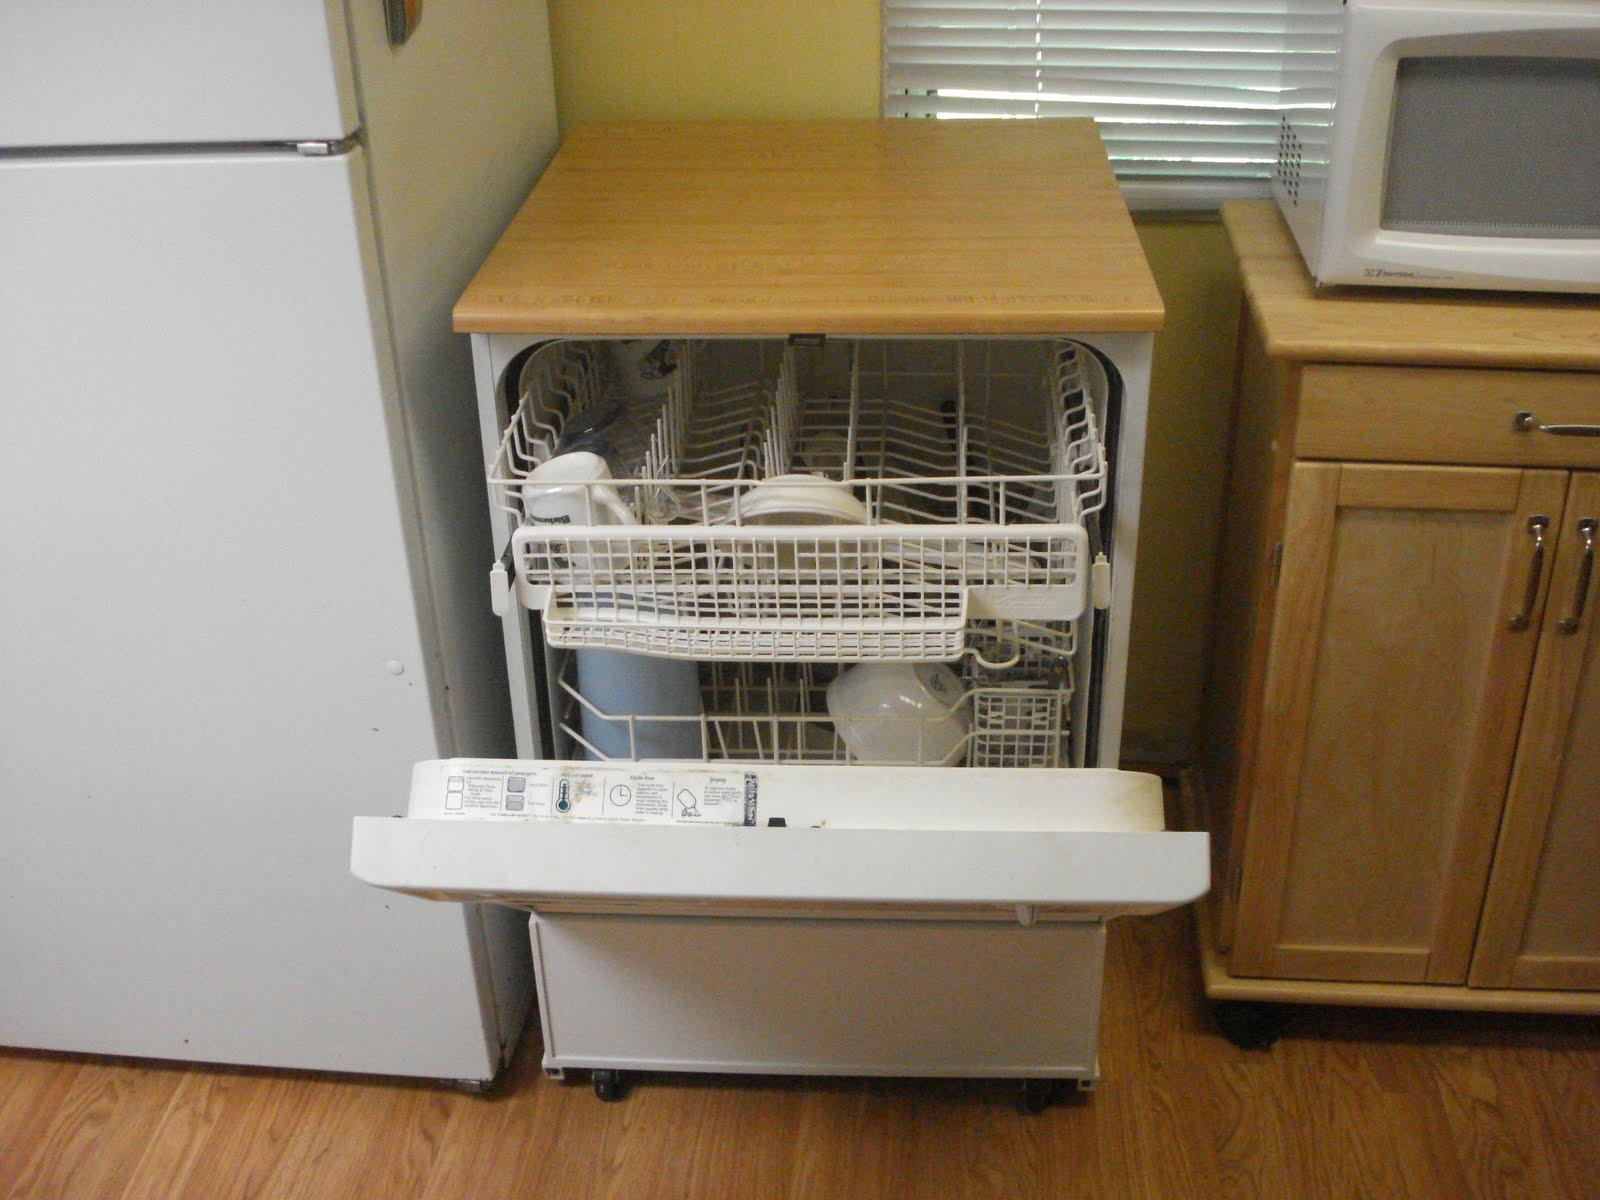 How To Use Portable Dishwasher